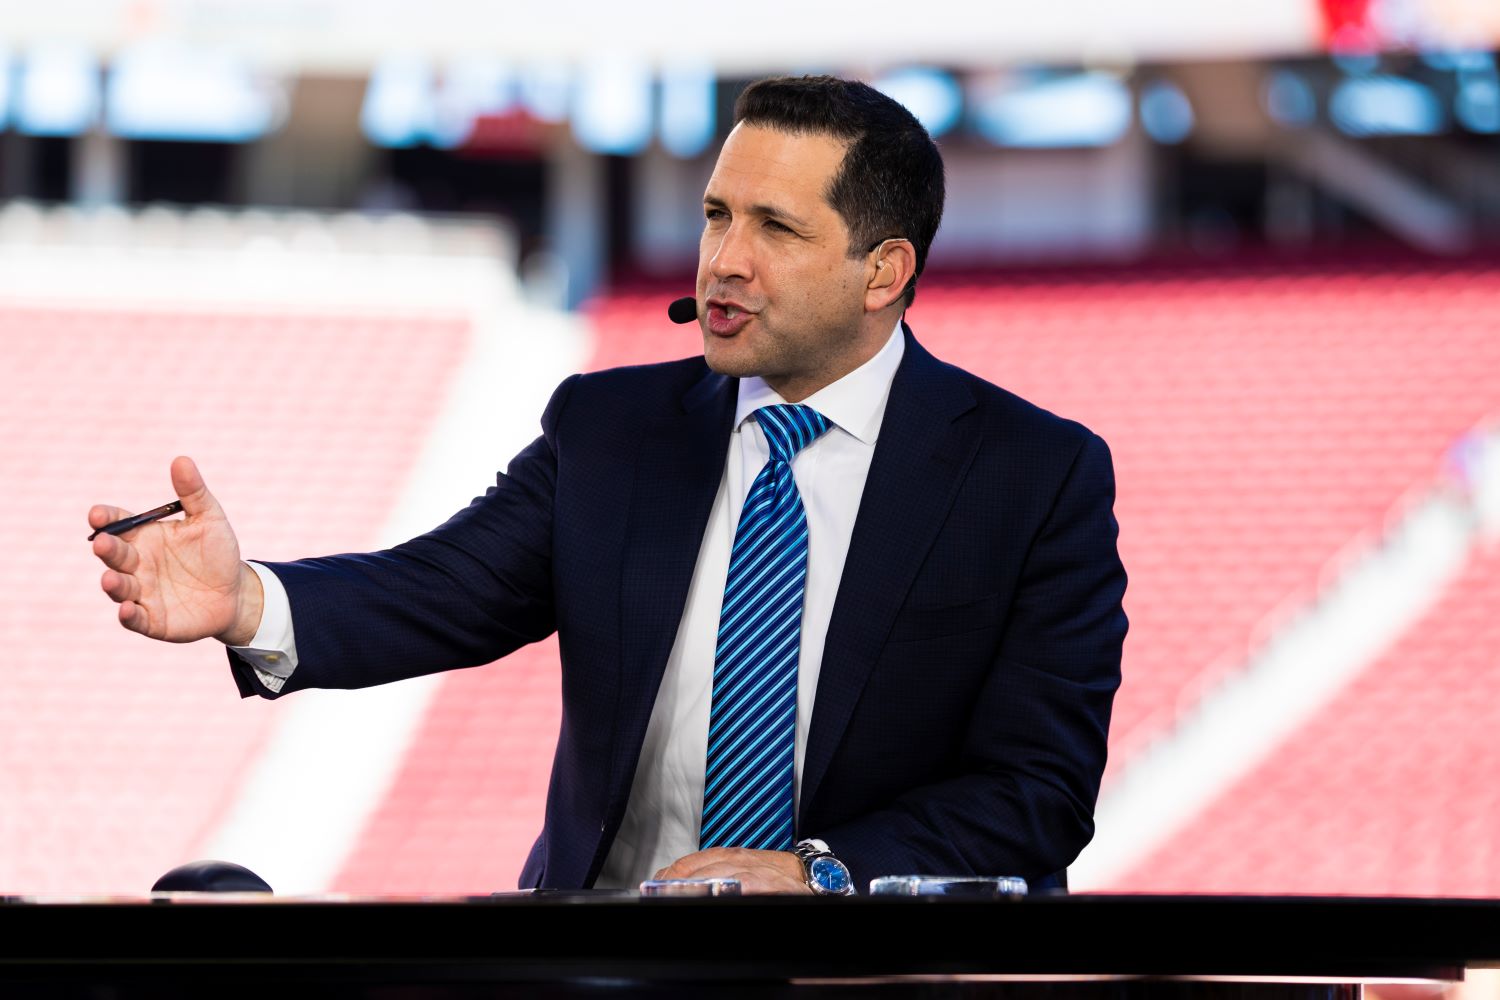 With so many NFL quarterbacks facing uncertain futures, Adam Schefter delivered a stunning prediction about how many QBs will change teams.